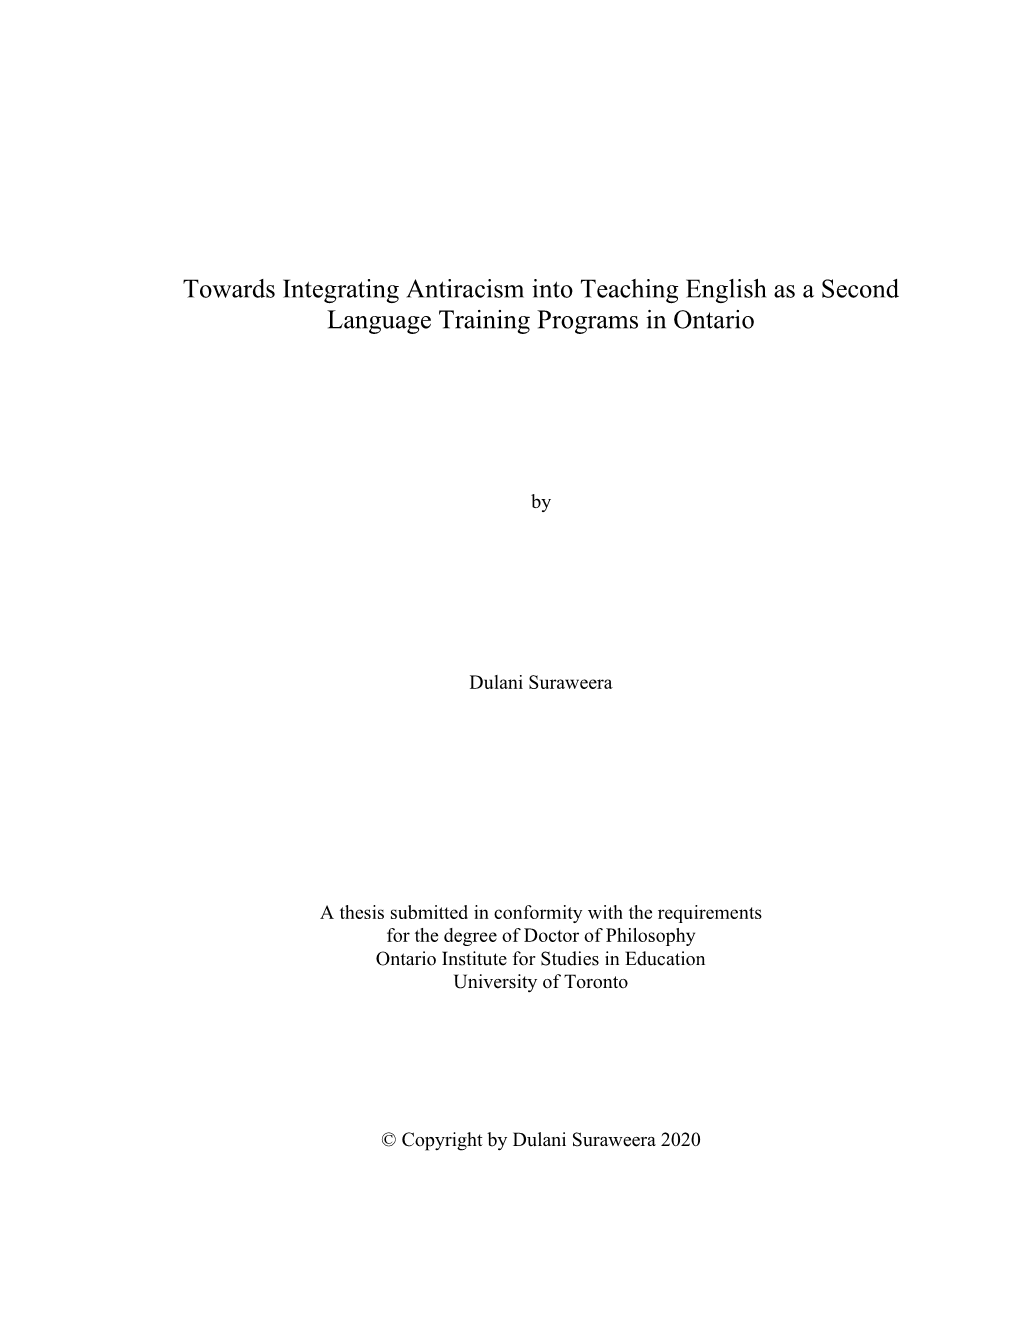 Towards Integrating Antiracism Into Teaching English As a Second Language Training Programs in Ontario